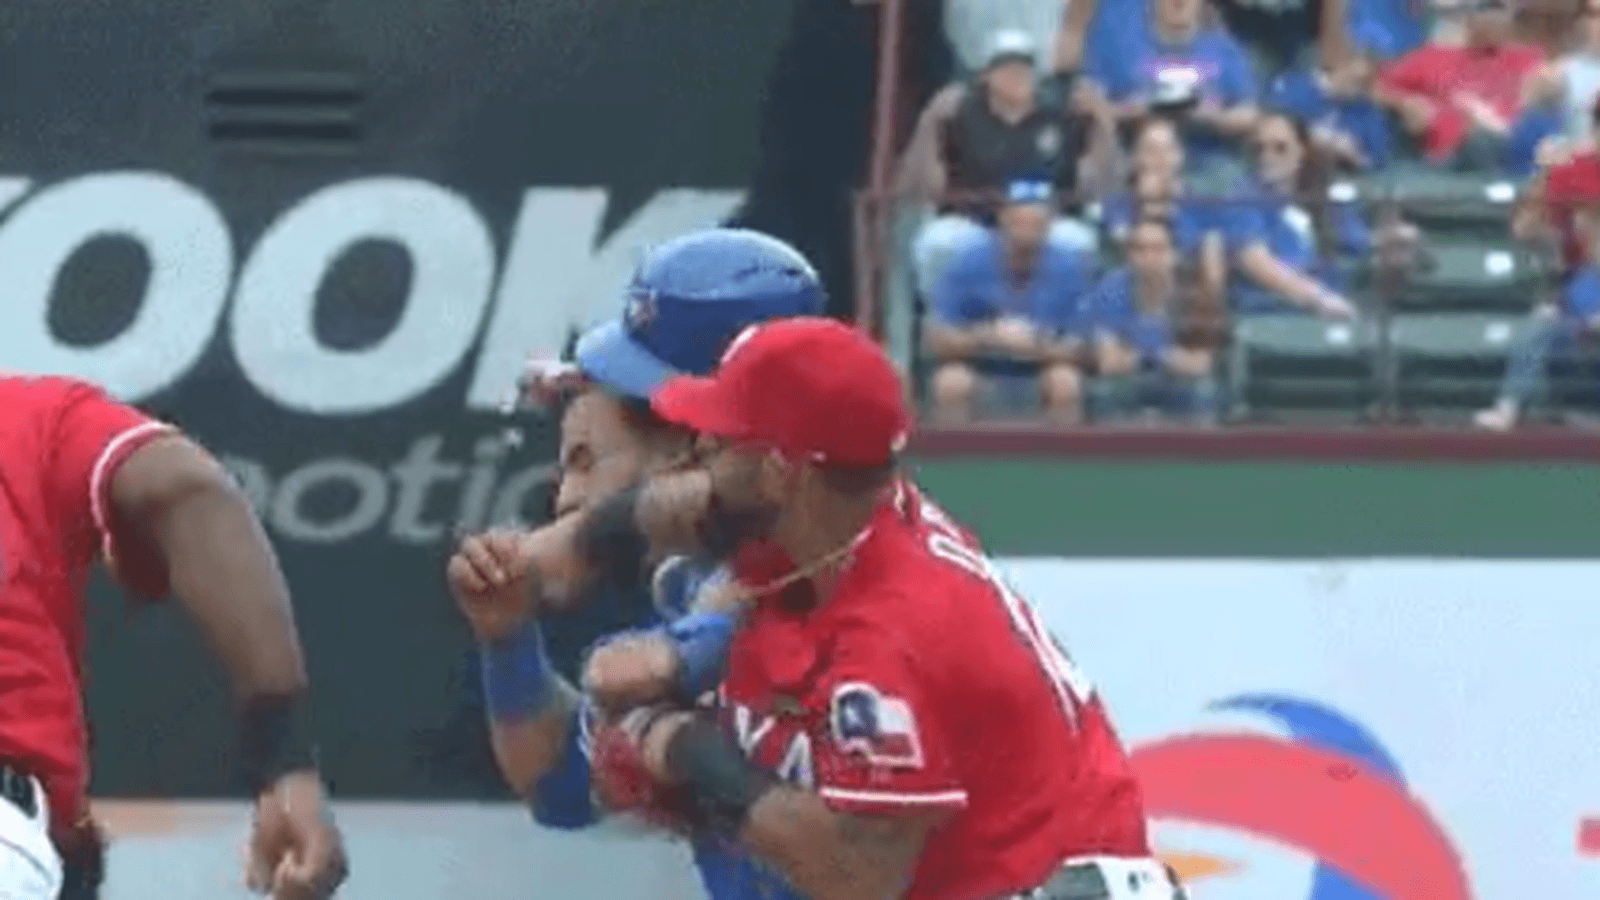 Rougned Odor punched Jose Bautista in the face in the biggest MLB